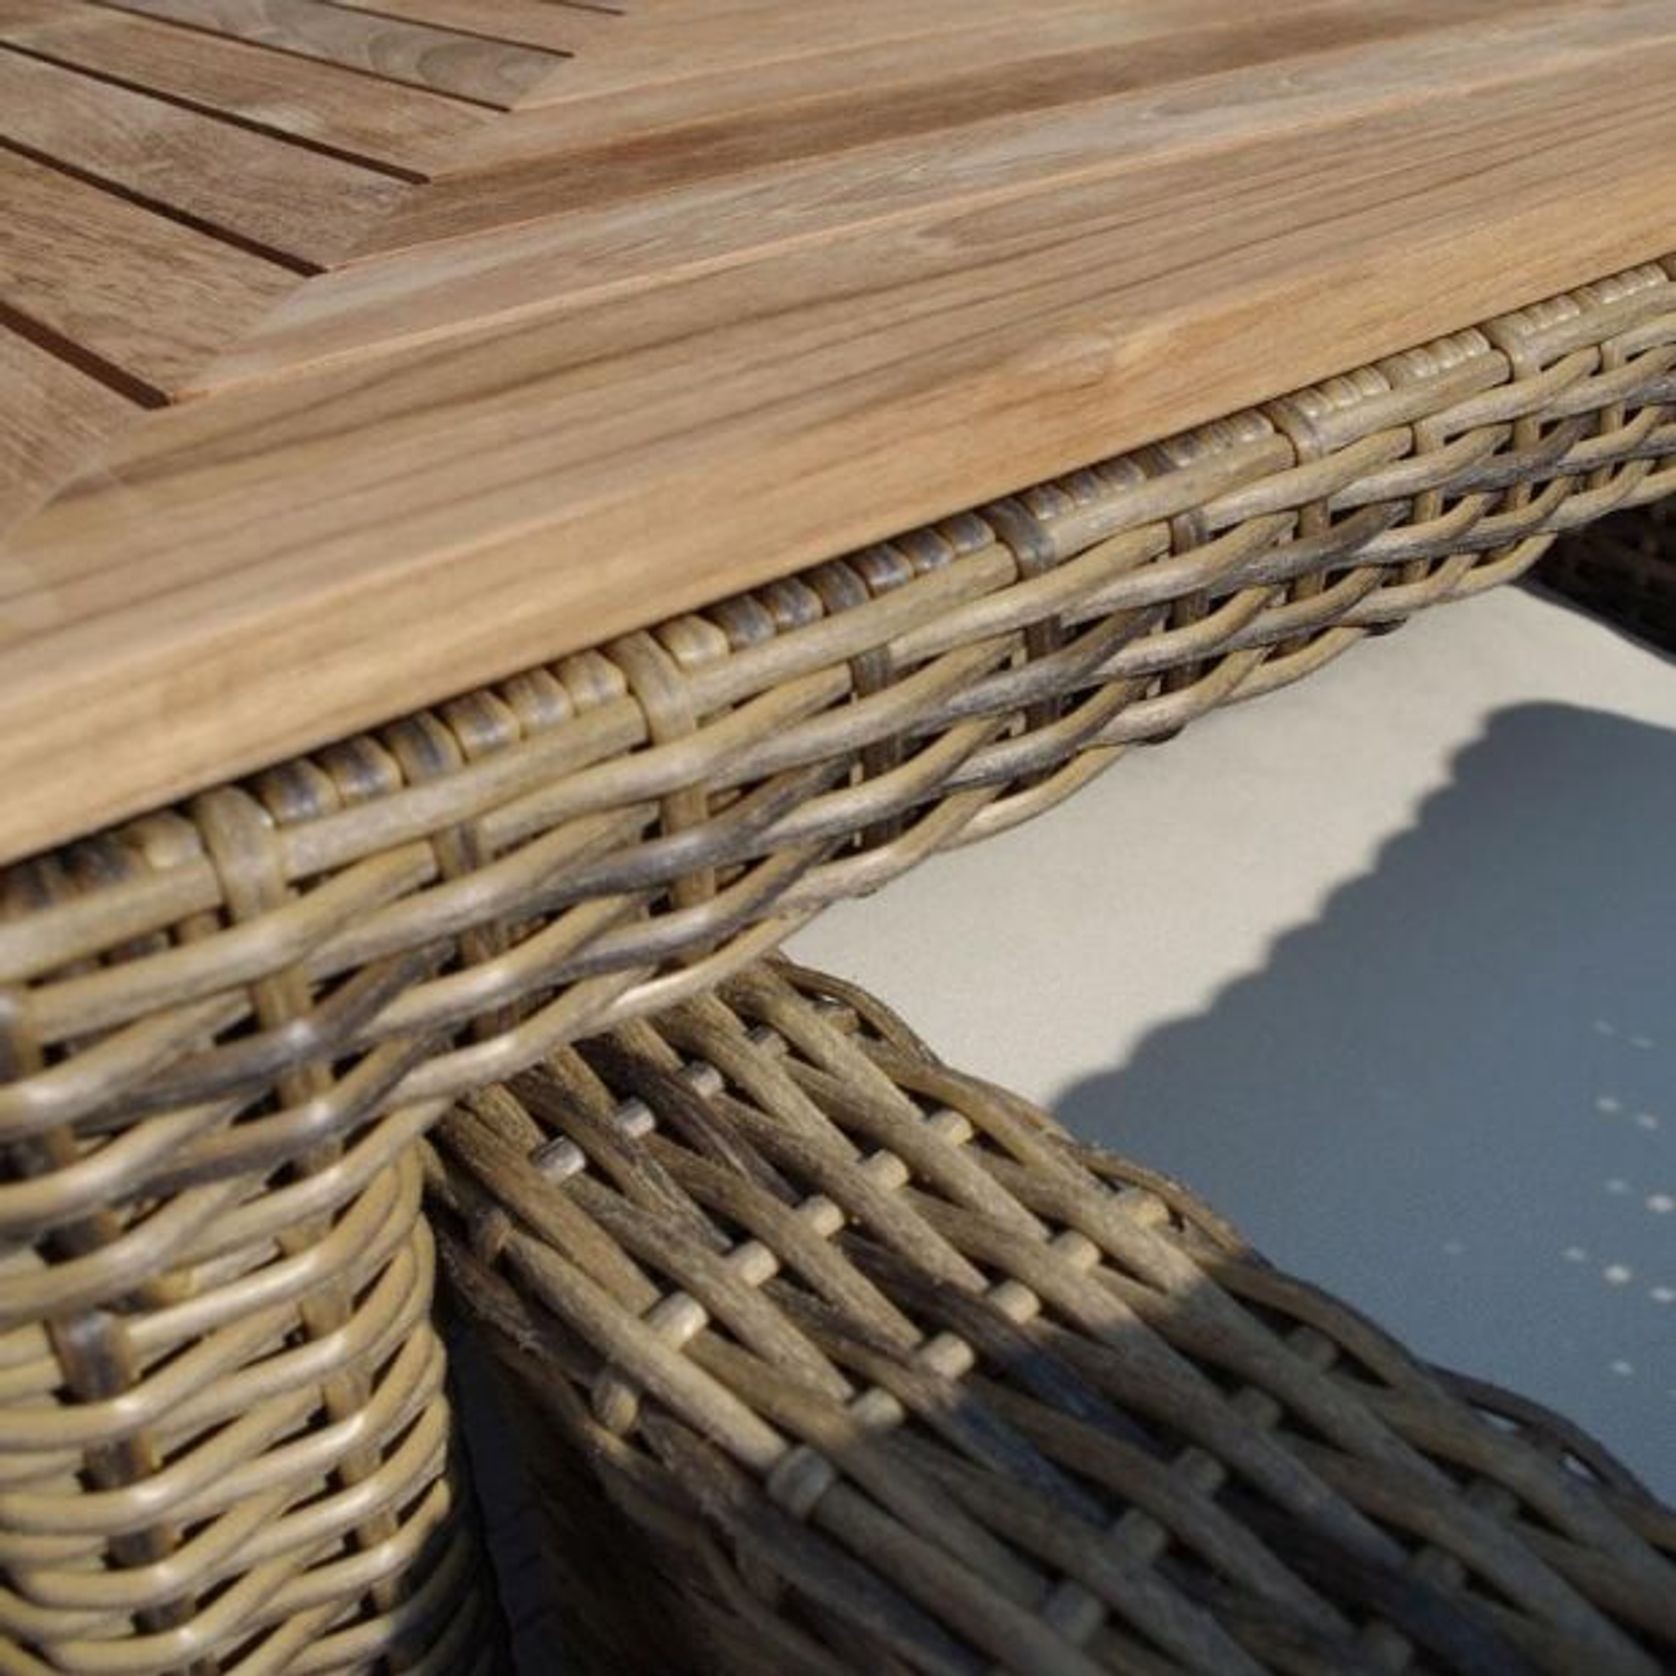 Sahara 8 Square Dining Setting In Half Round Wicker gallery detail image